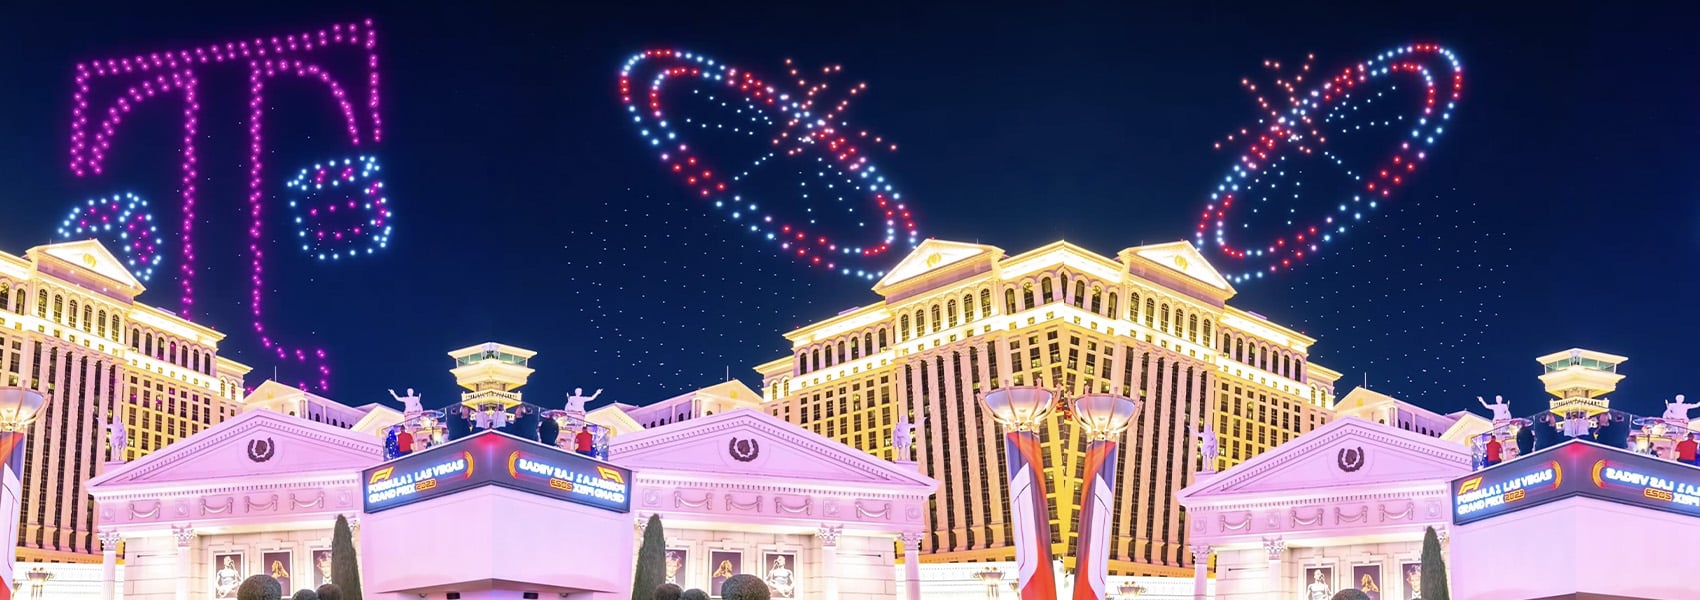 Article - We lit up the skies during the Formula 1 Las Vegas drone show